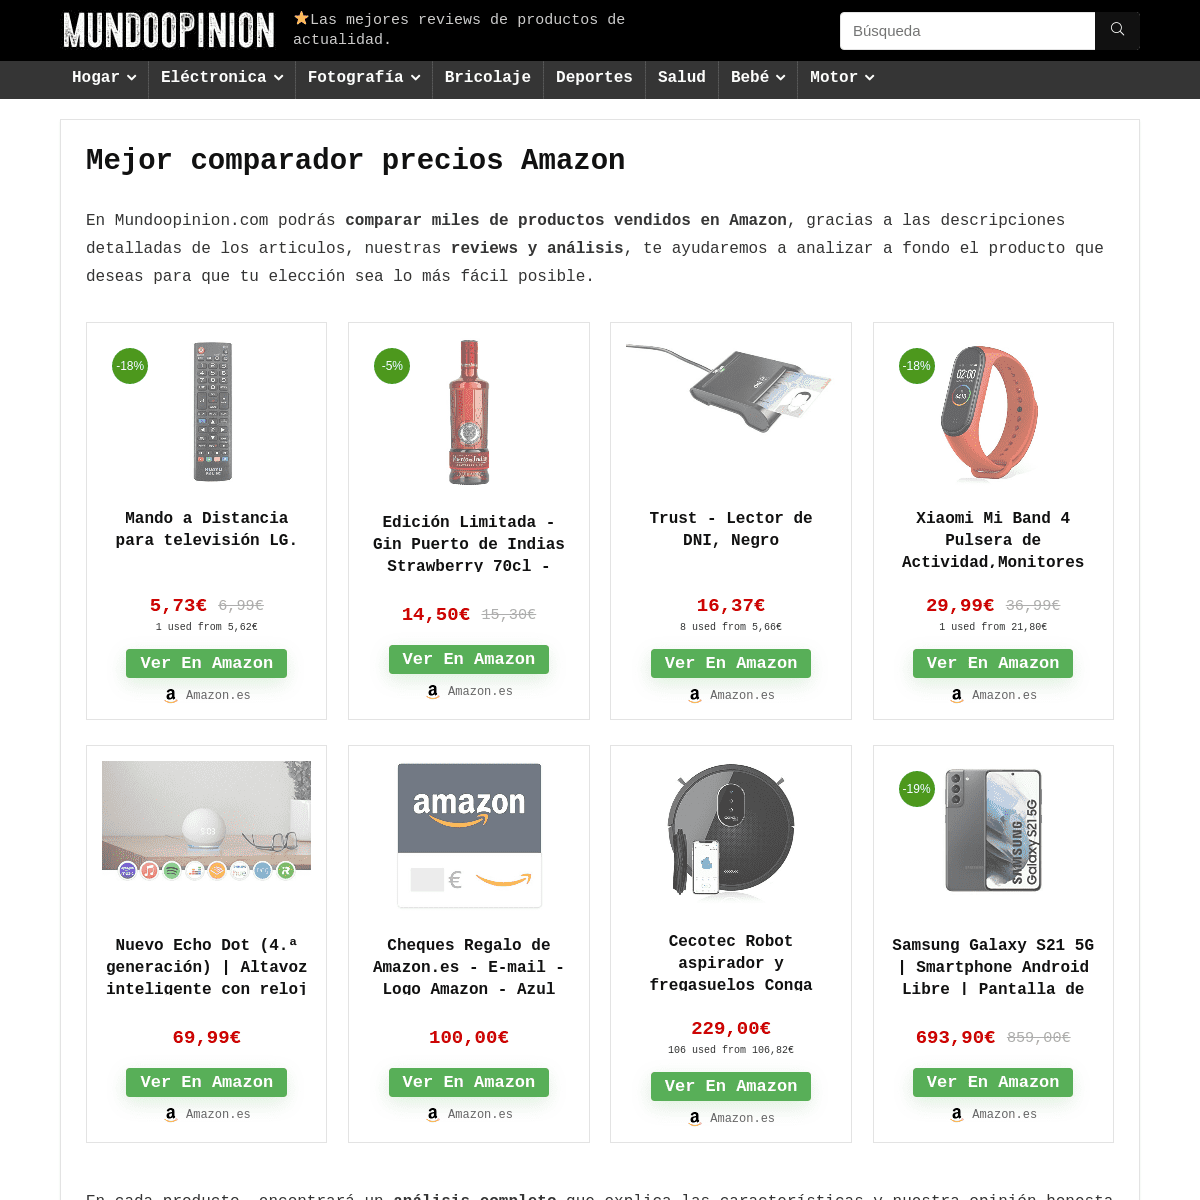 A complete backup of https://mundoopinion.com